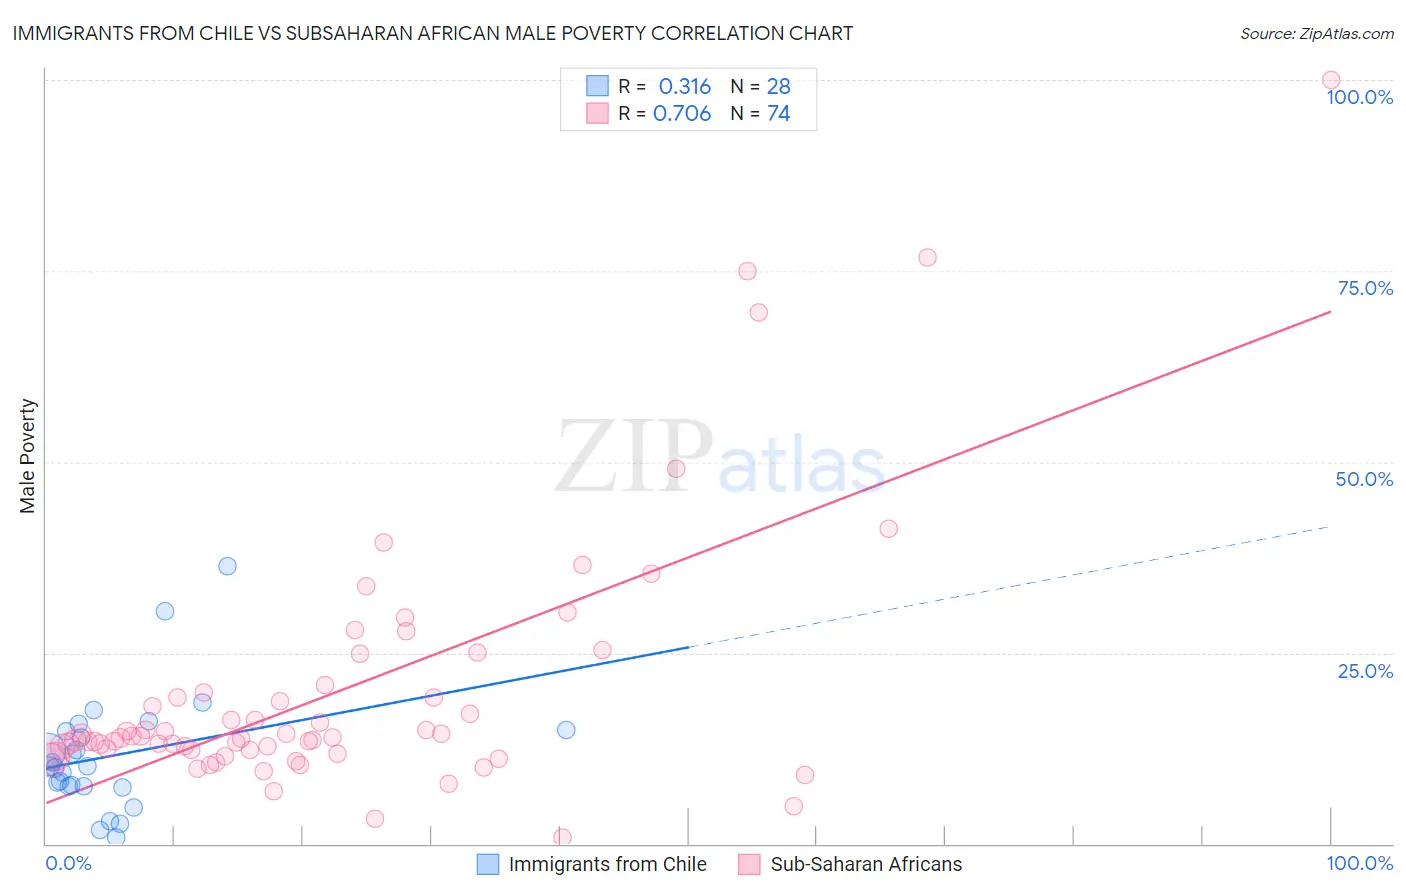 Immigrants from Chile vs Subsaharan African Male Poverty